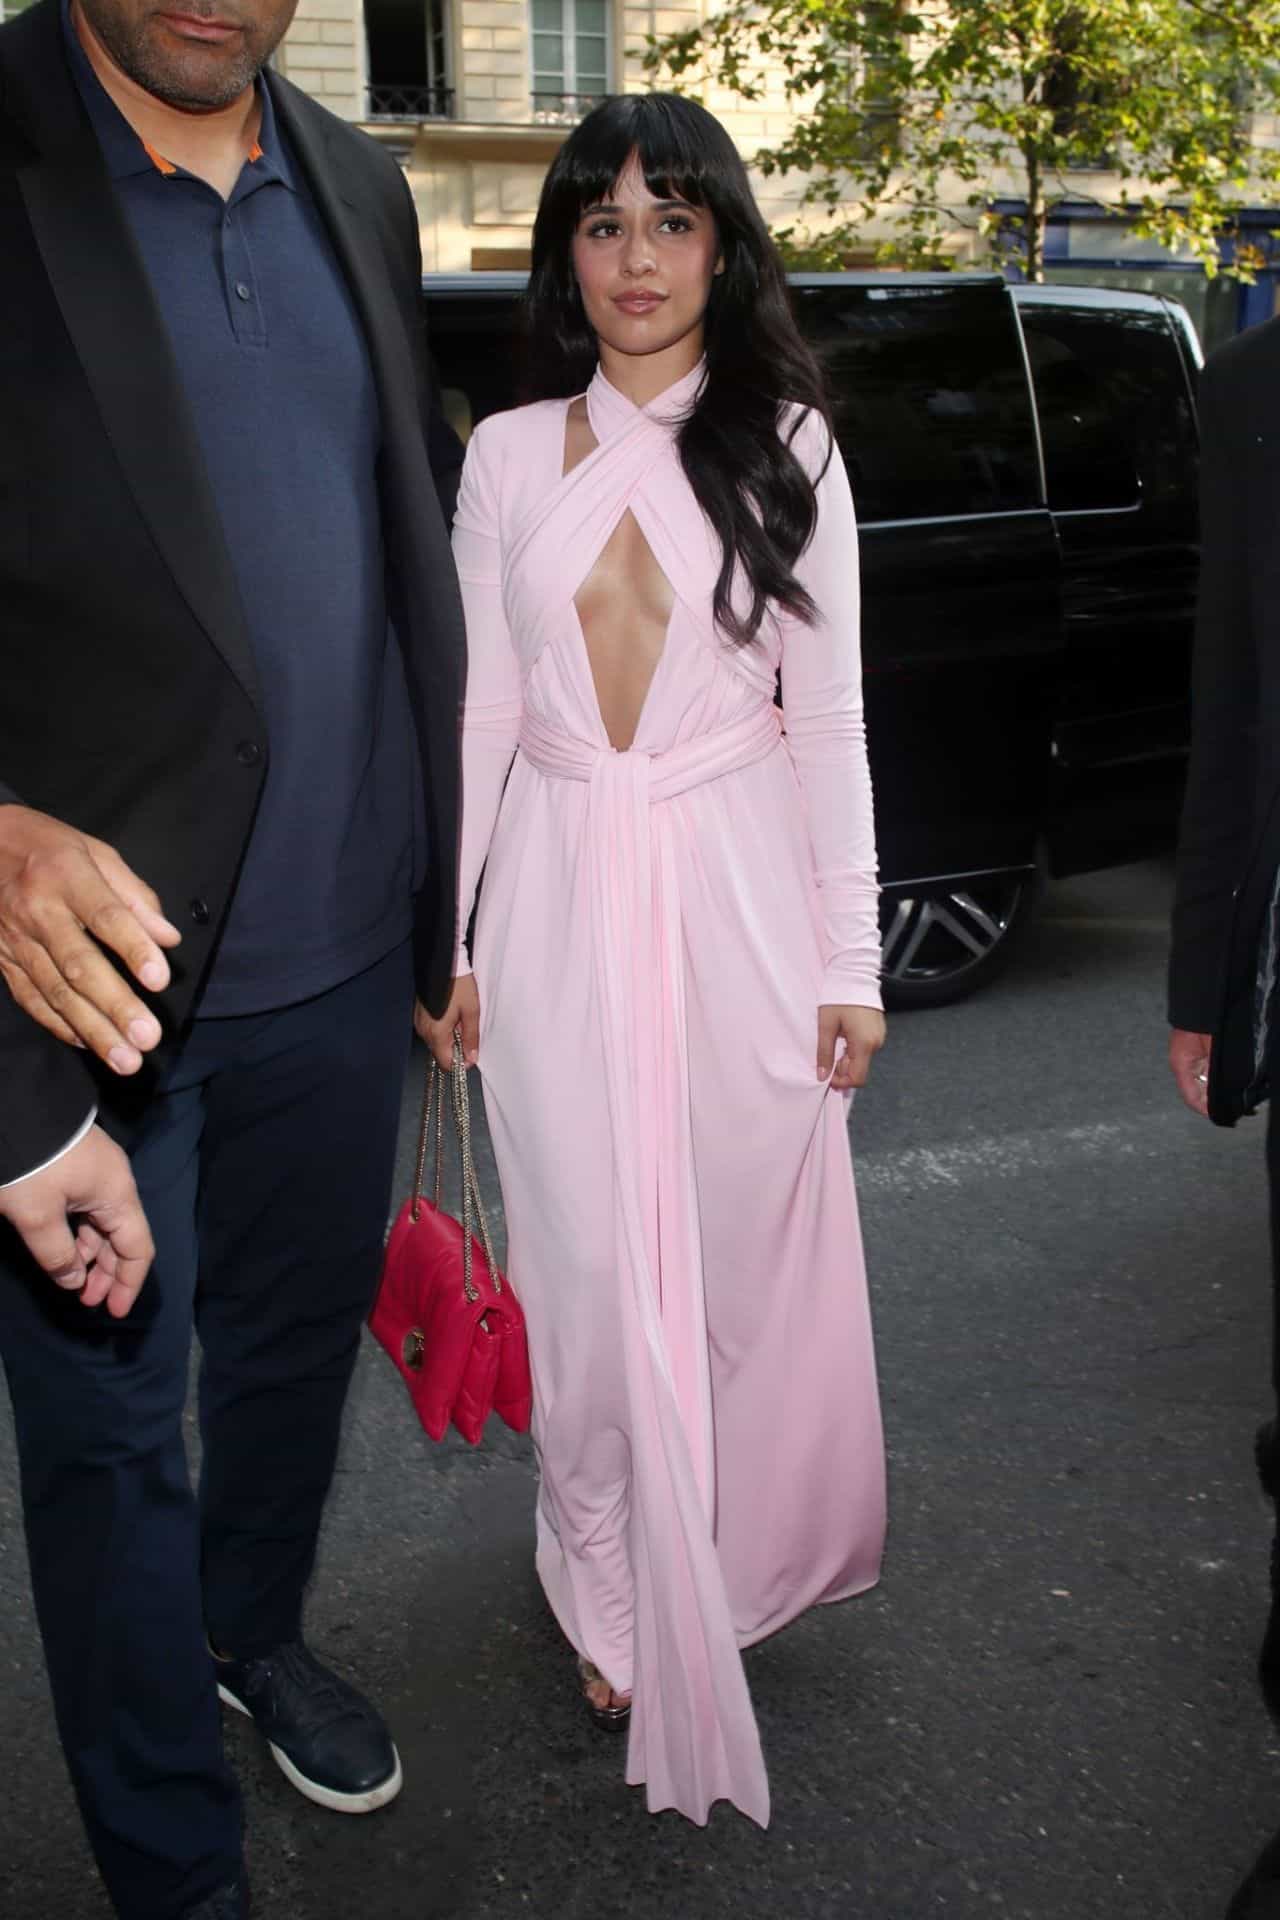 Camila Cabello Turns Heads in a Stunning Pink Gown at Paris Fashion Week